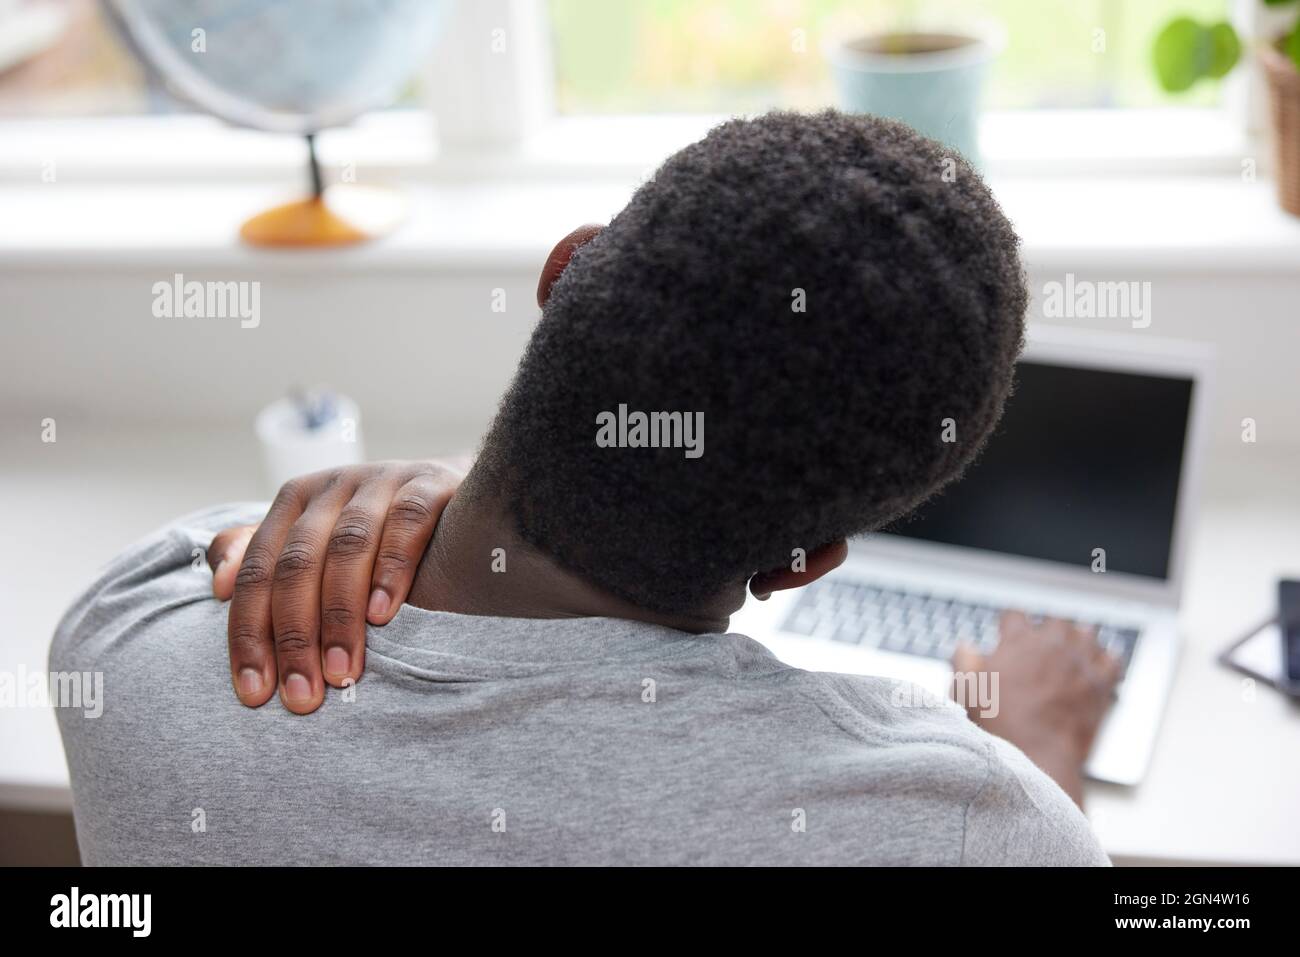 Rear View Of Man At Home Working On Laptop Rubbing Neck And Shoilder in Pain Stock Photo